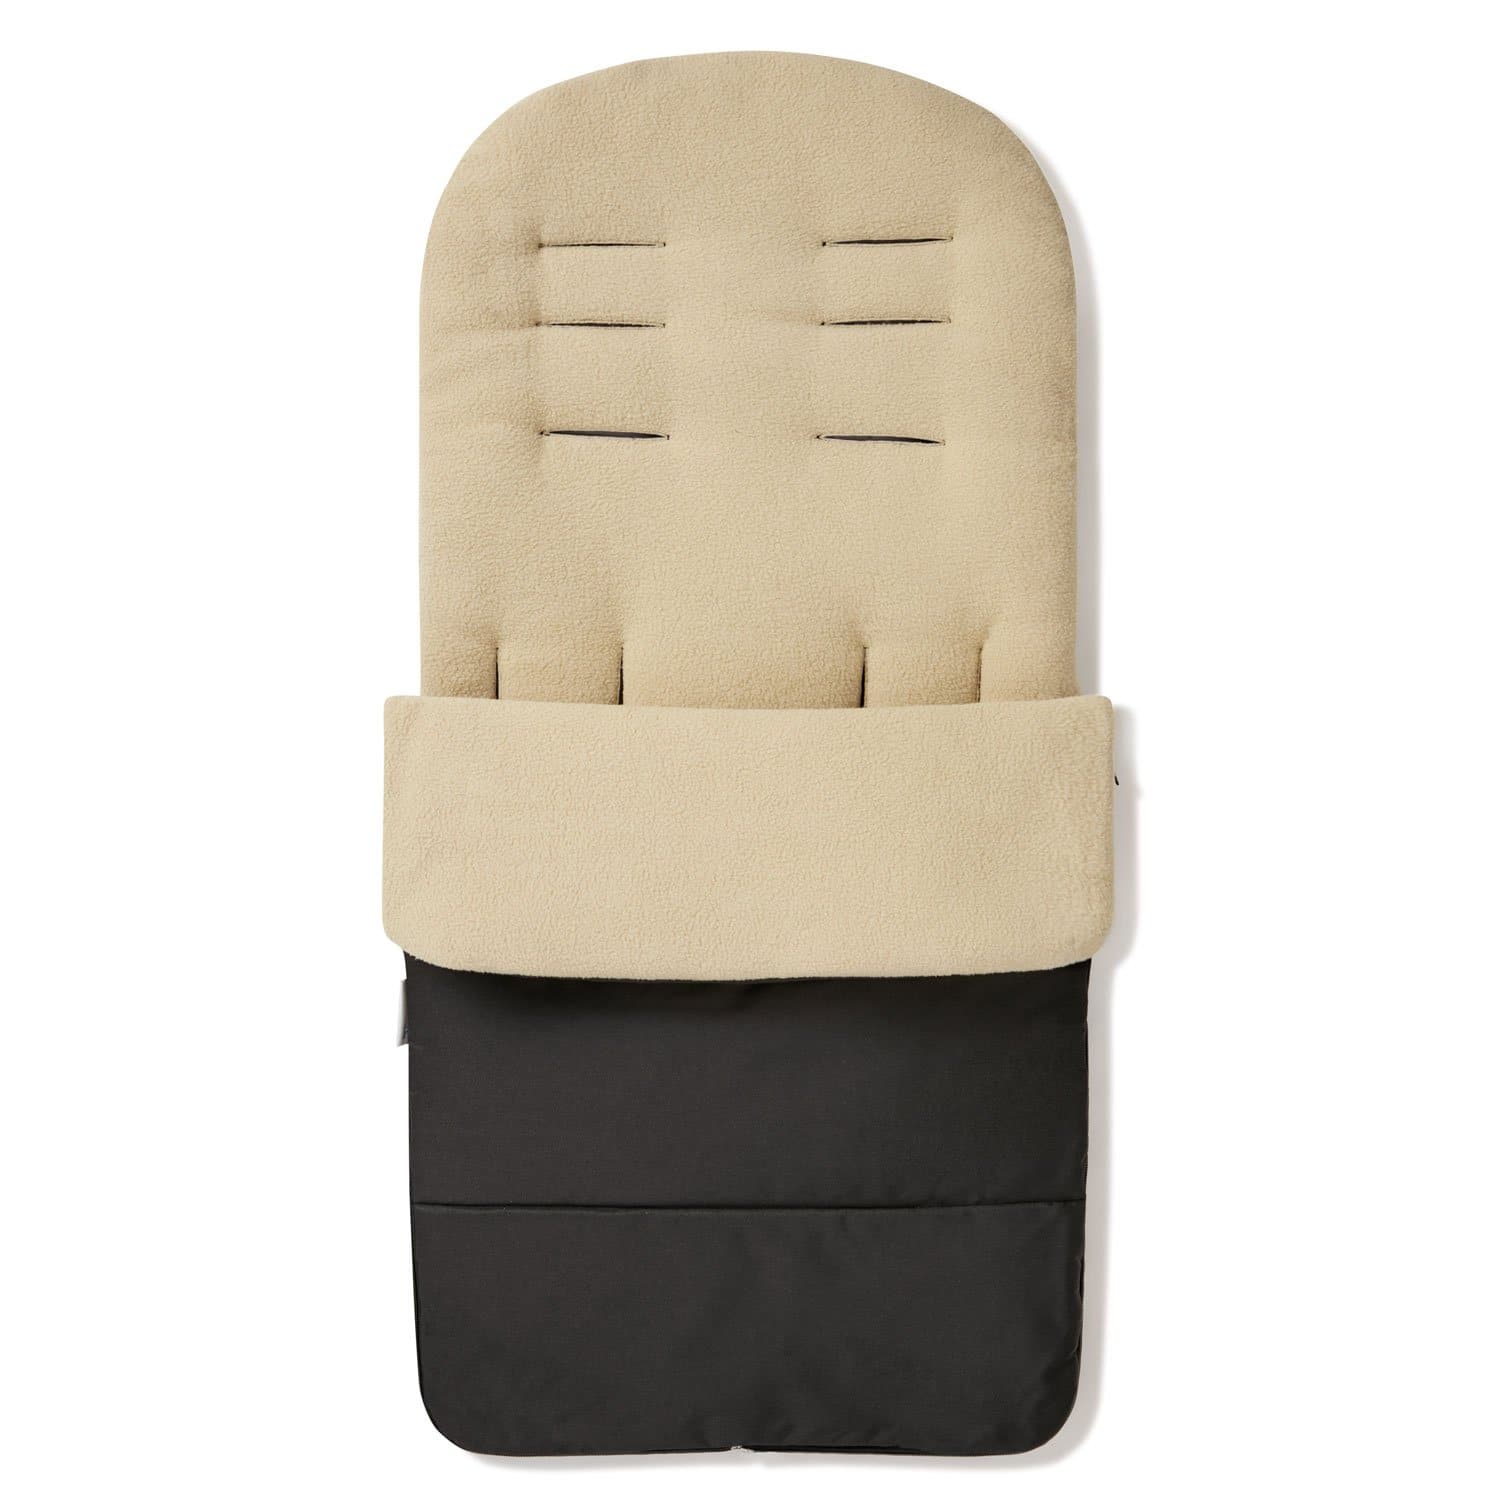 Premium Footmuff / Cosy Toes Compatible with Cosatto - Desert Sand / Fits All Models | For Your Little One